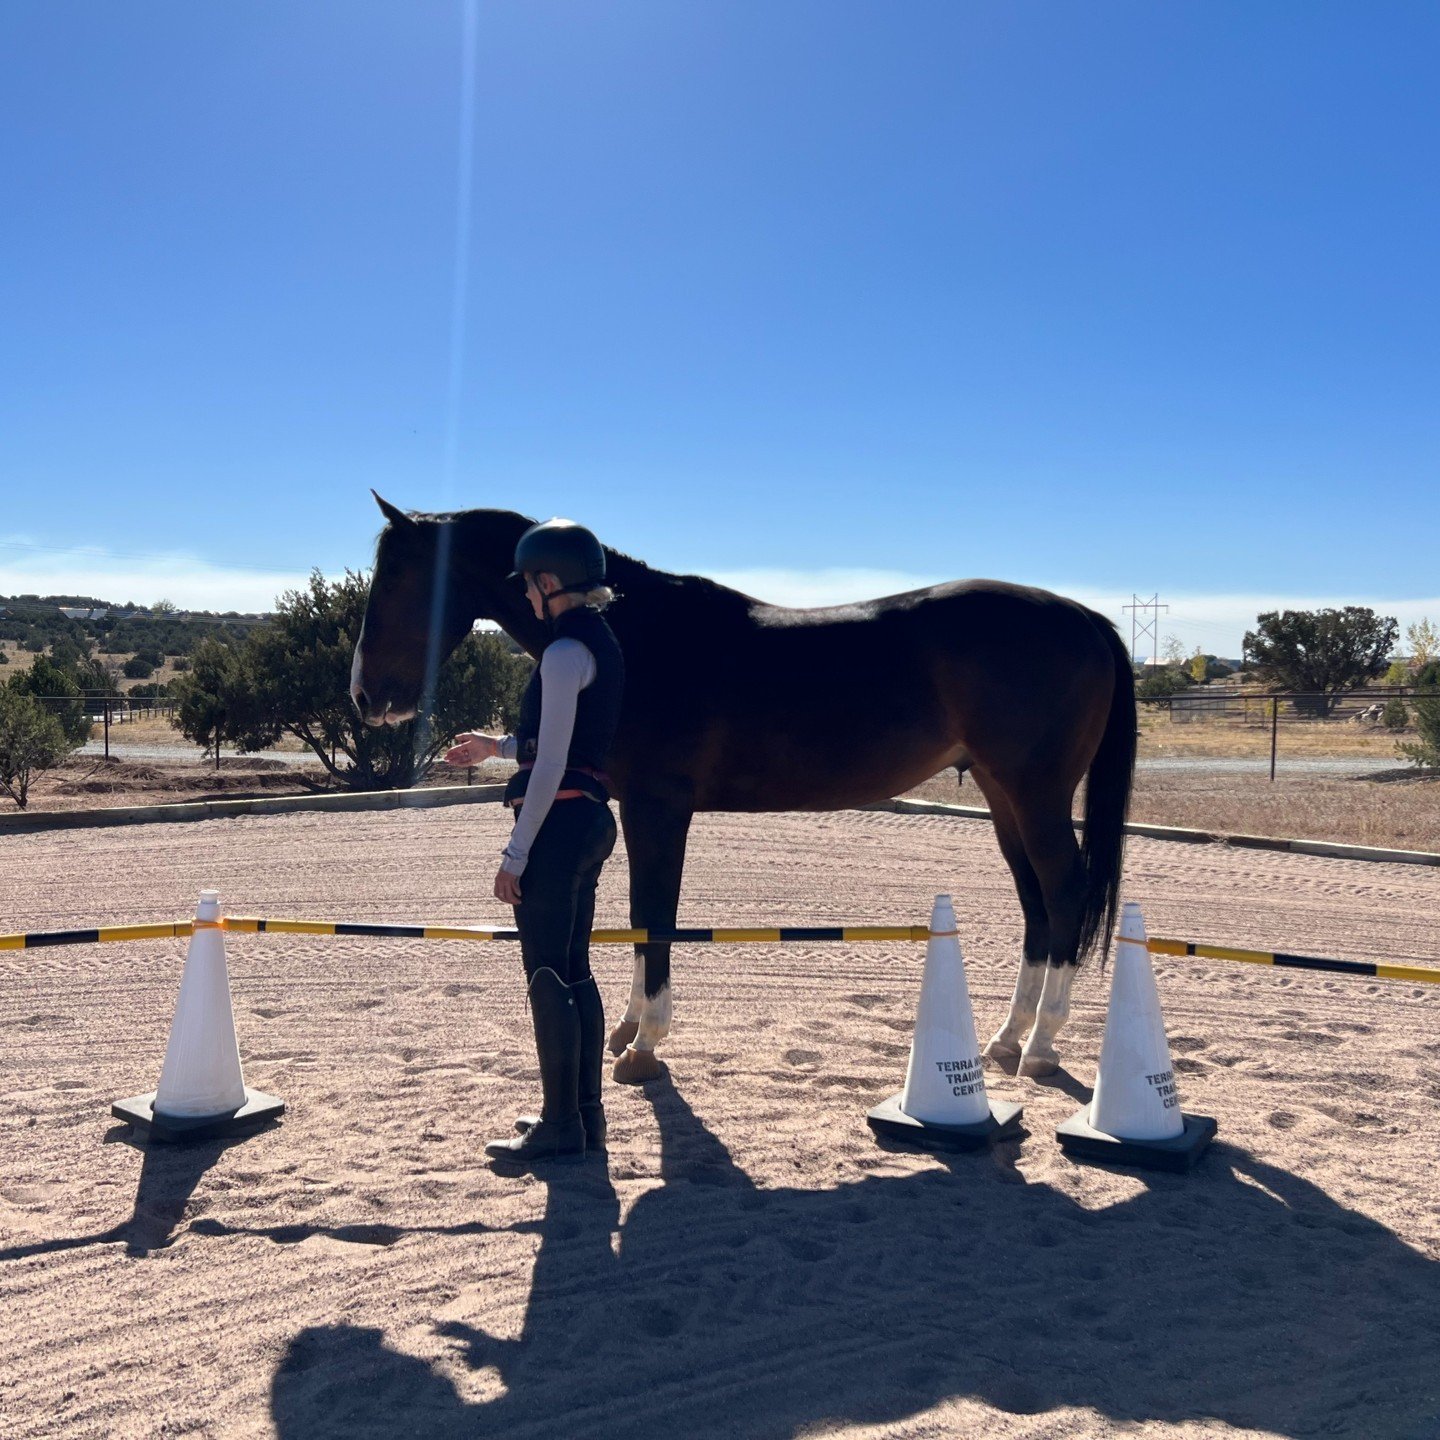 Dhyana and Westley doing some reverse round pen training! 🙌

This setup is great for Positive Reinforcement training (R+) as it gives the horse freedom to choose if they want to participate or not! From an R+ approach, this provides us with a lot of